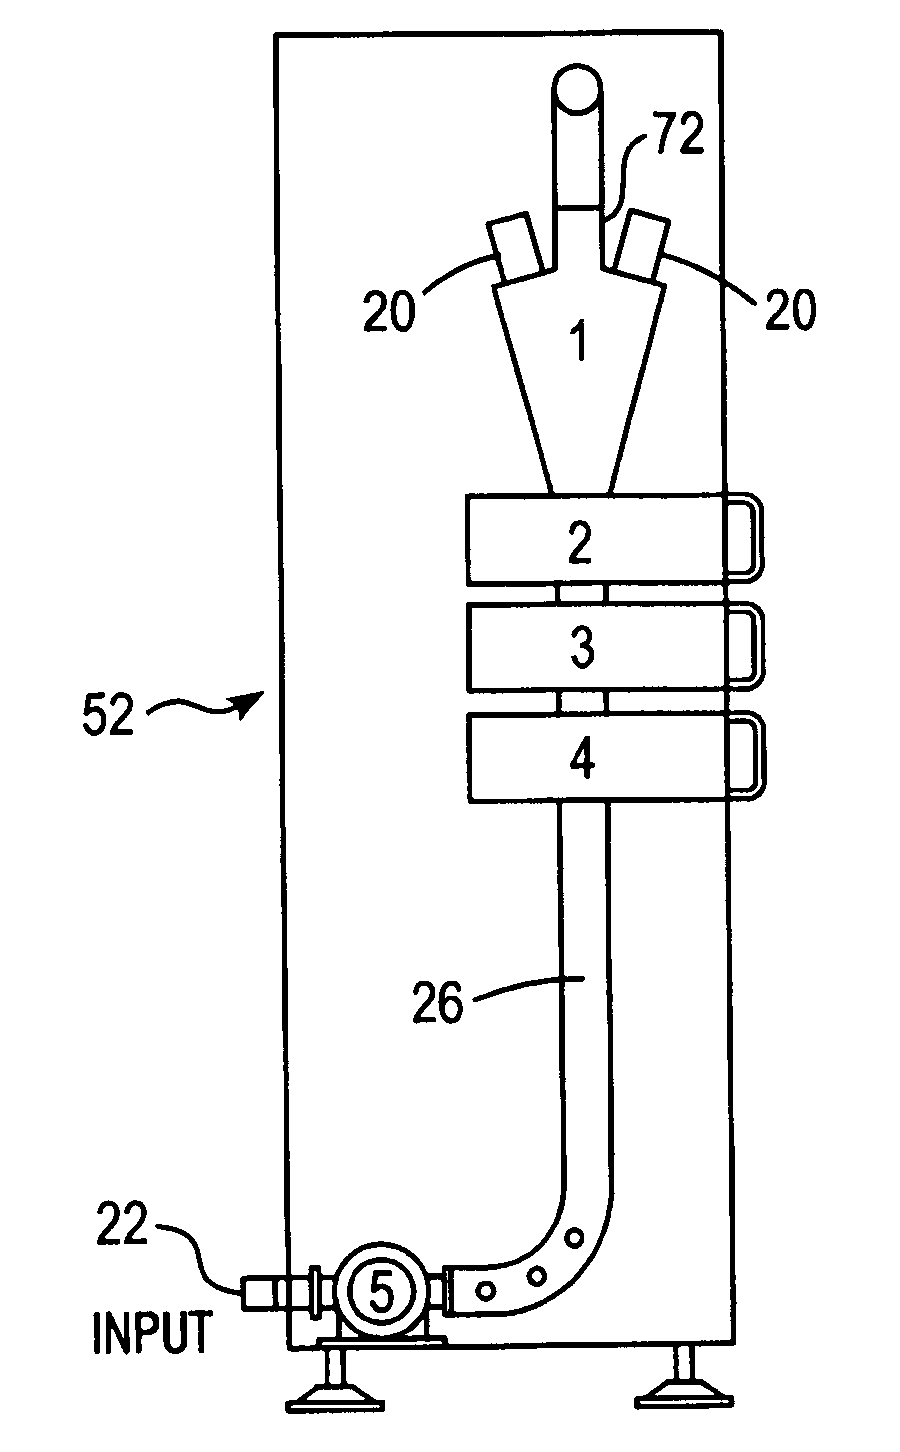 Method and device for removal of ammonia and related contaminants from water